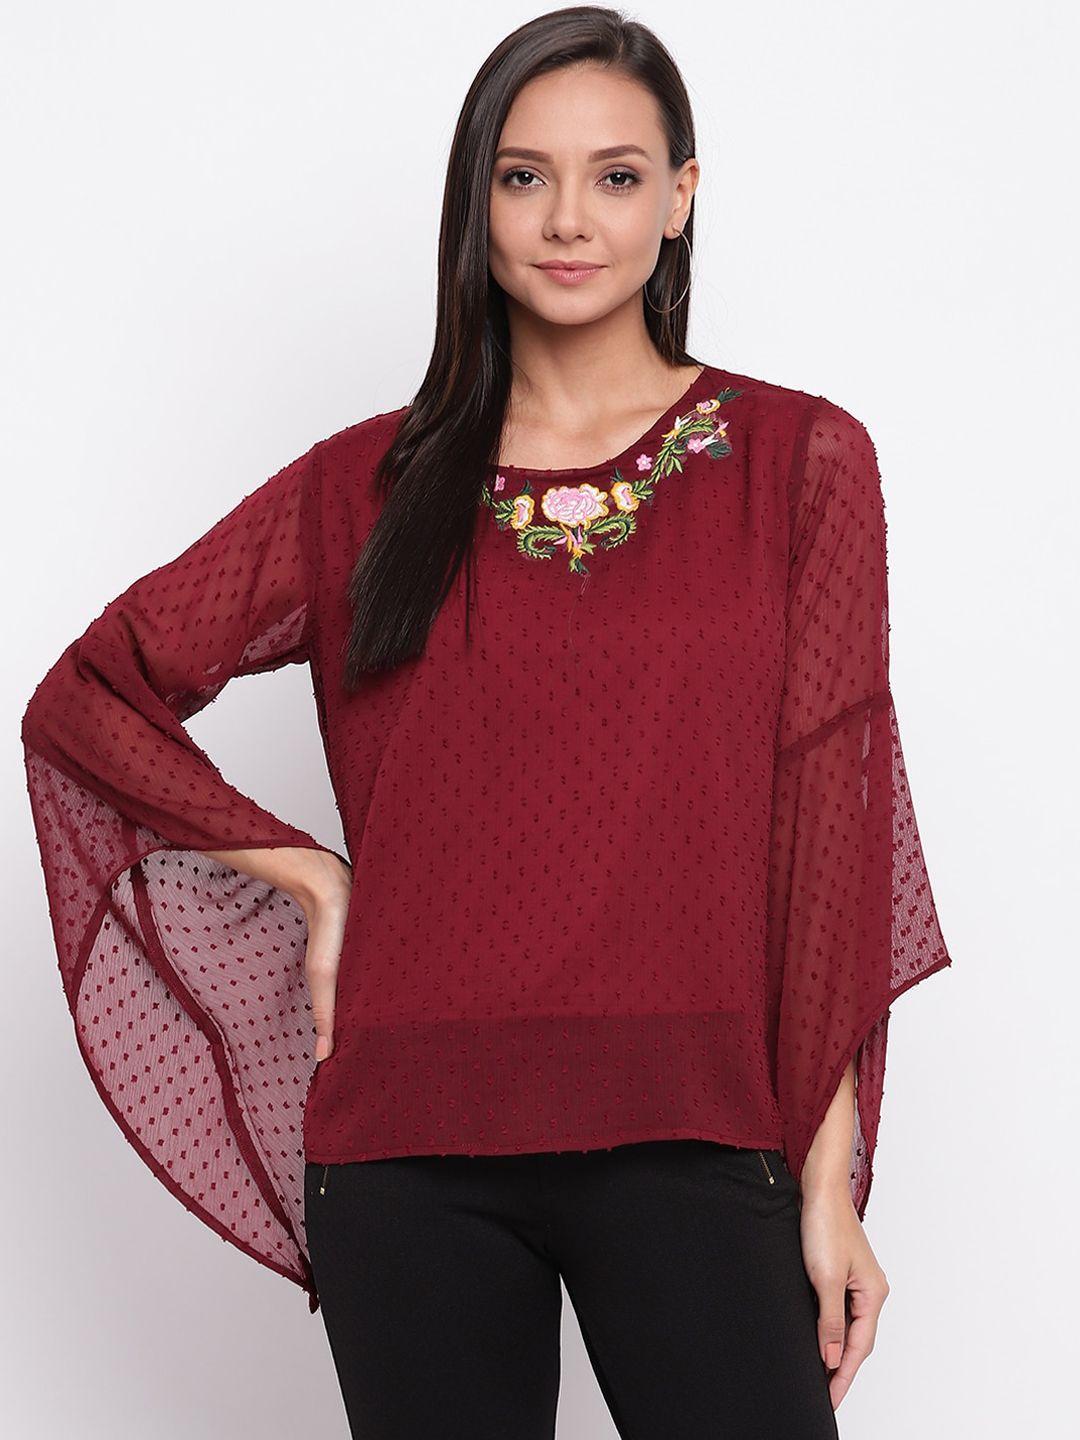 mayra women maroon embroidered top